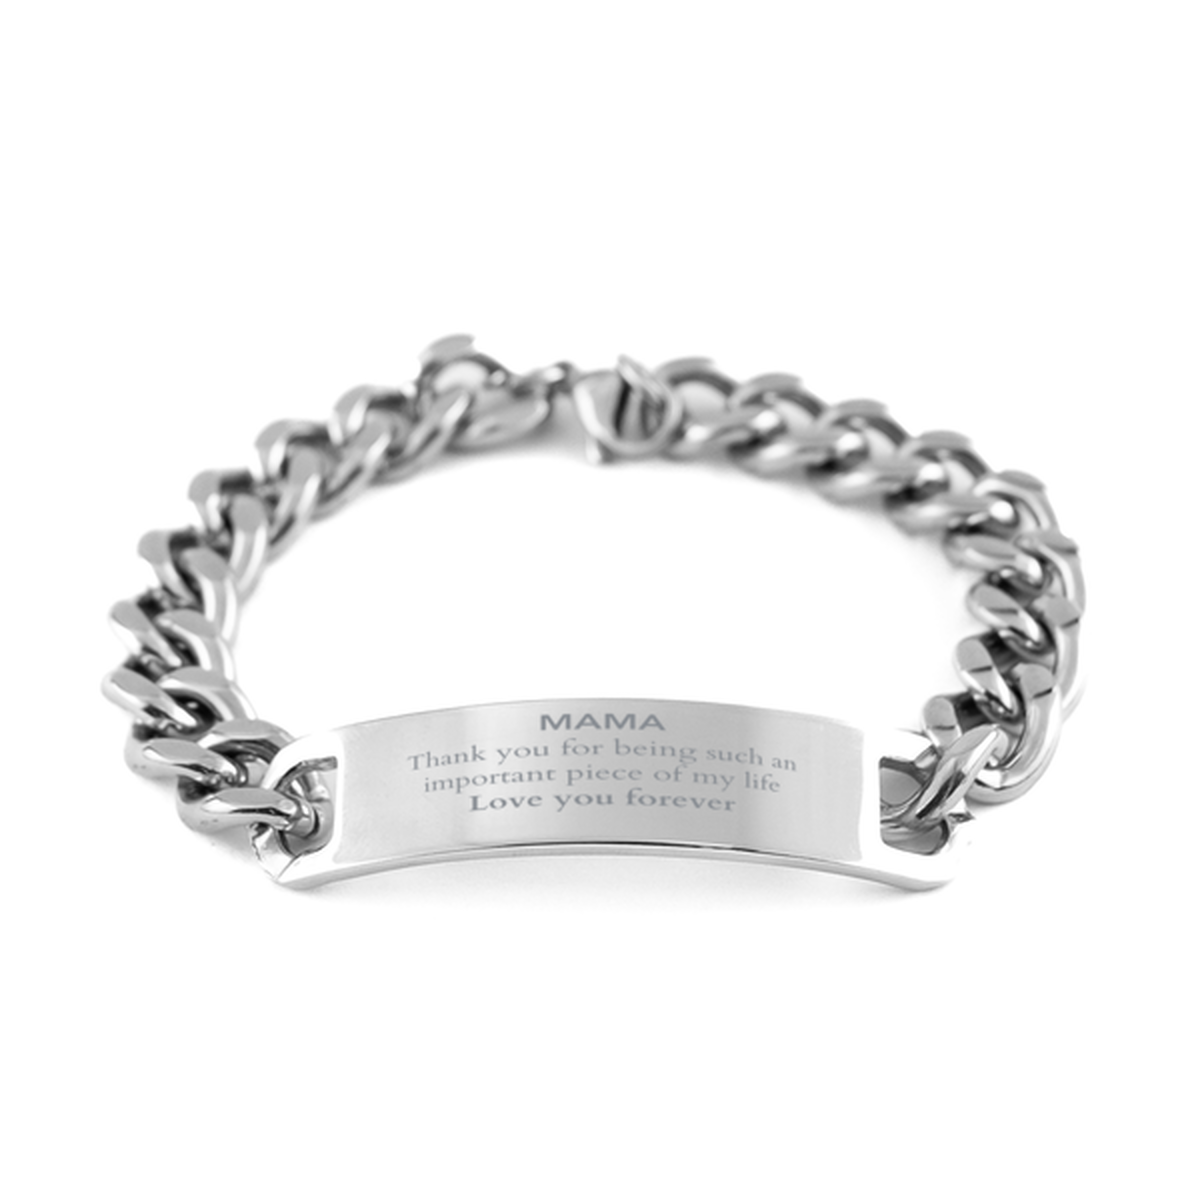 Appropriate Mama Cuban Chain Stainless Steel Bracelet Epic Birthday Gifts for Mama Thank you for being such an important piece of my life Mama Christmas Mothers Fathers Day